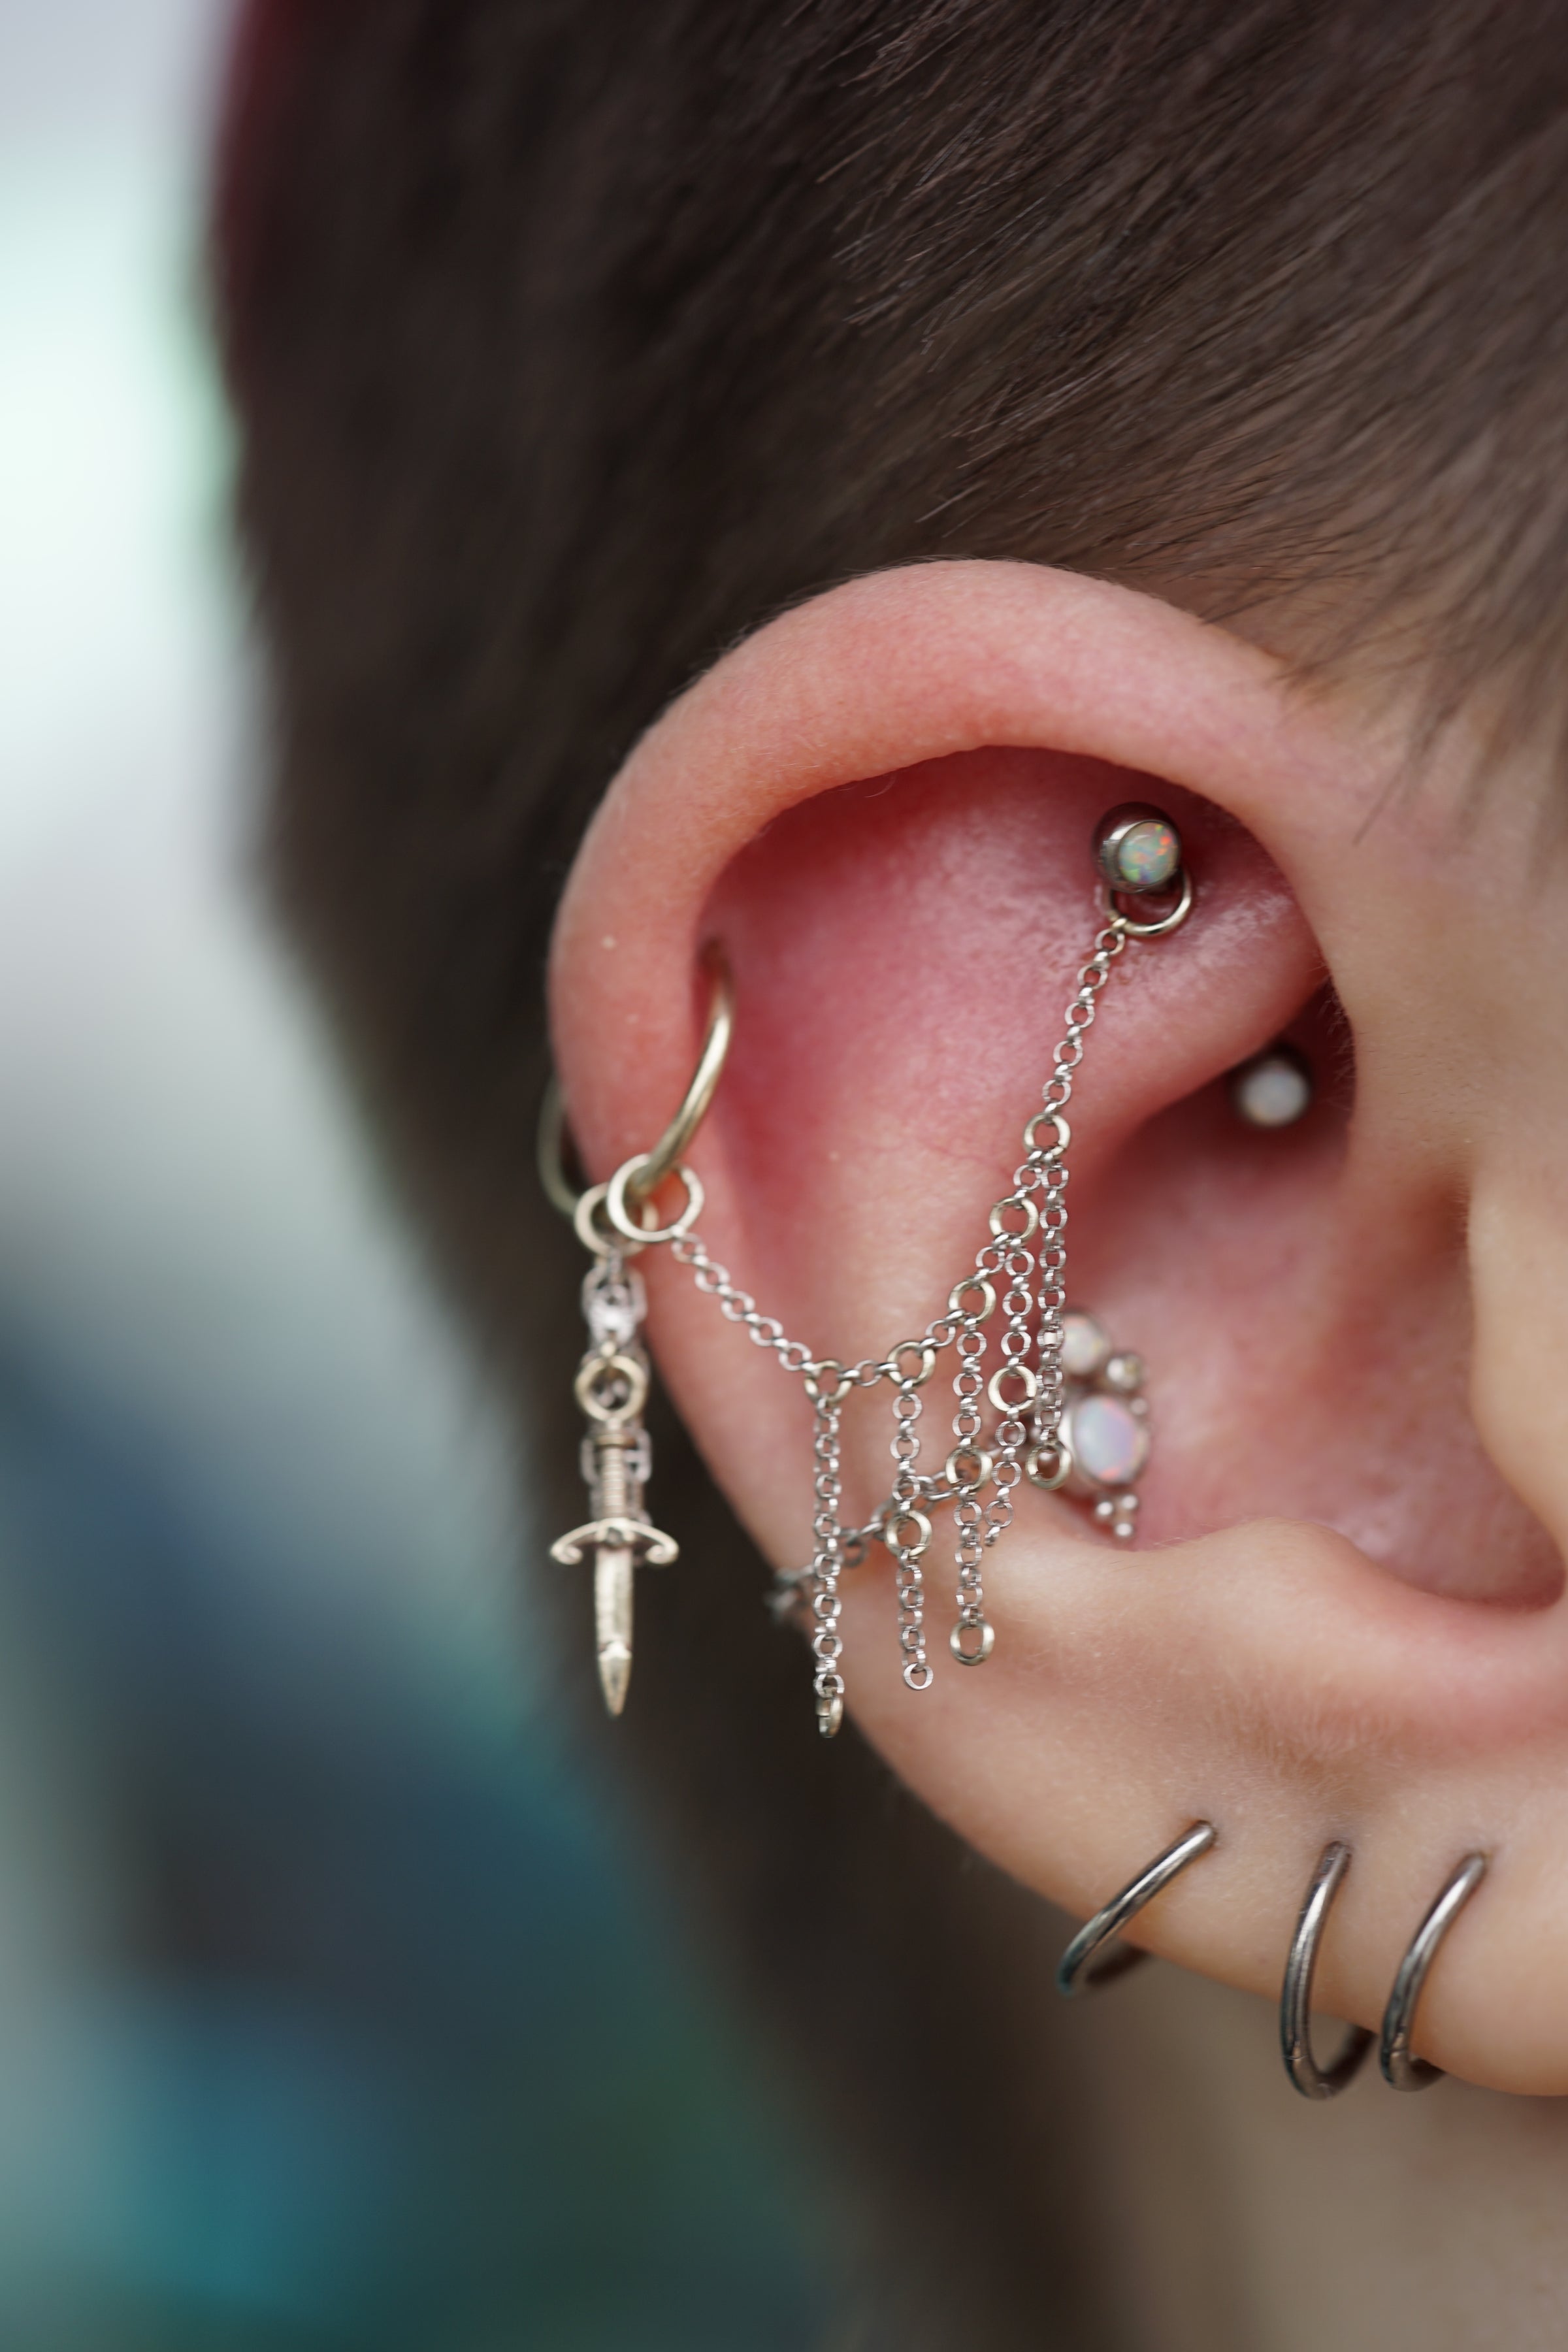 Best Piercing in Tacoma. Best Value, Best Quality, Safest (and more!)